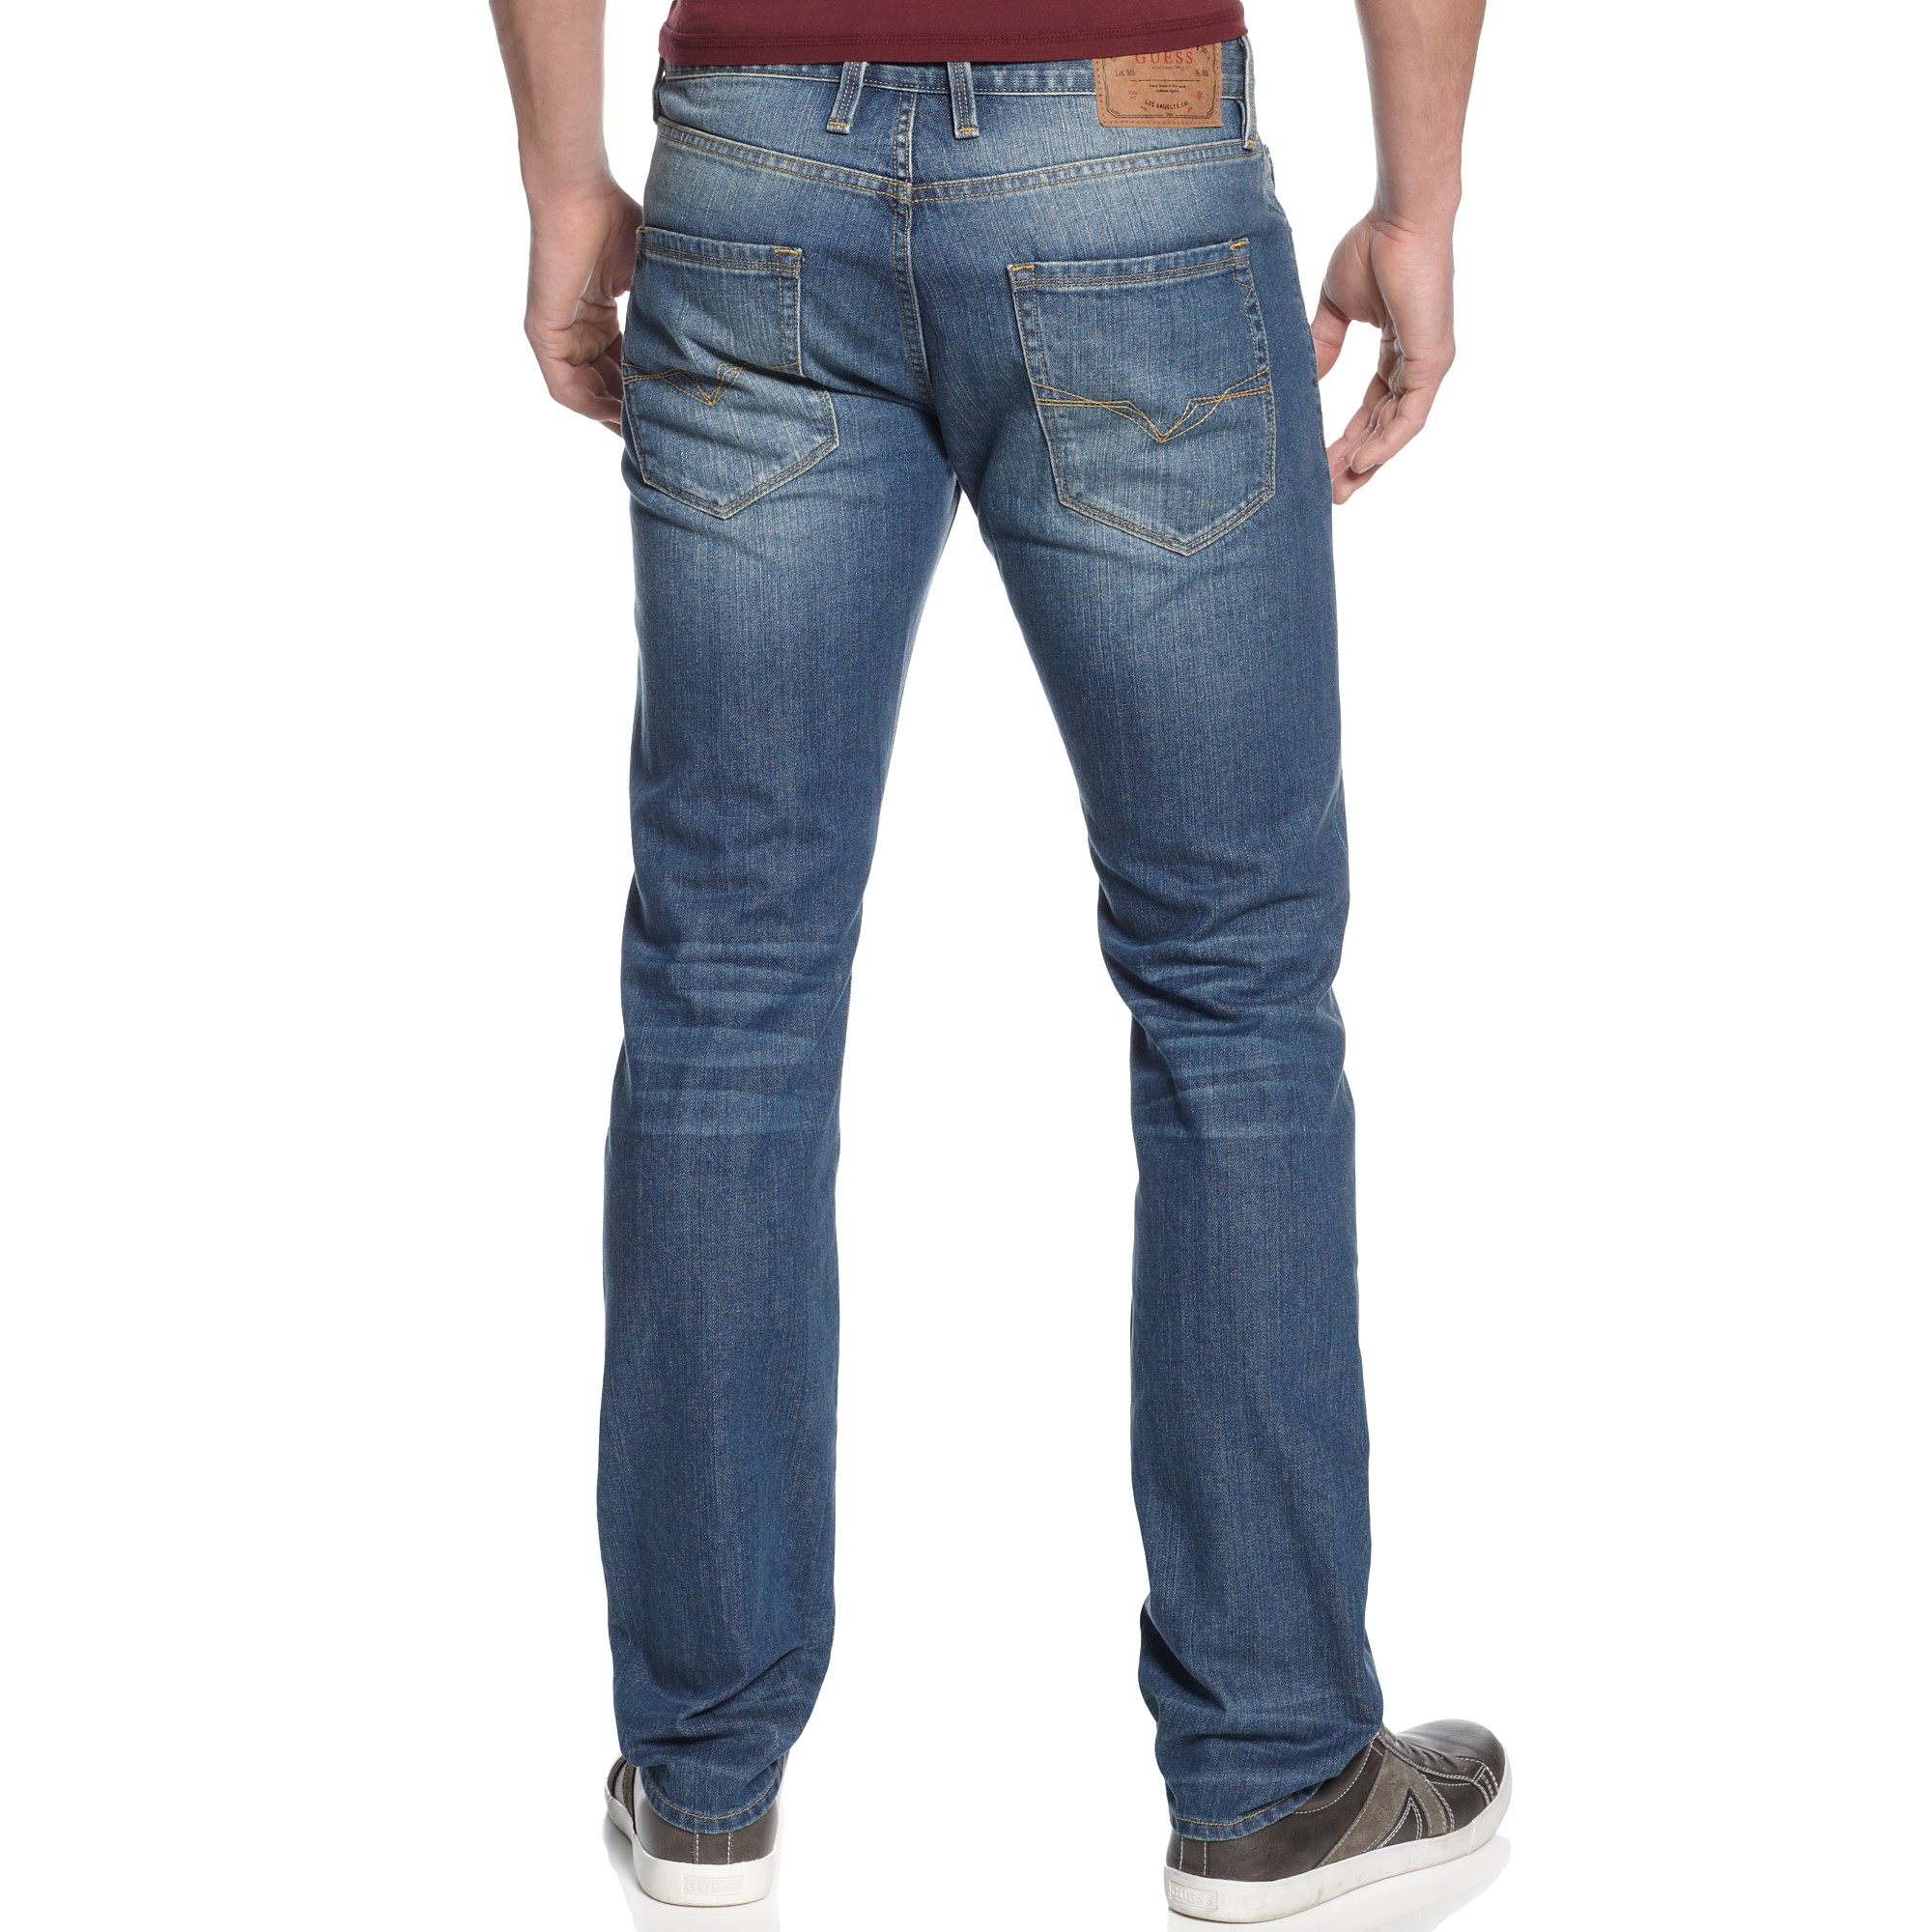 Lyst - Guess Vermont Slim Fit Jeans in Blue for Men